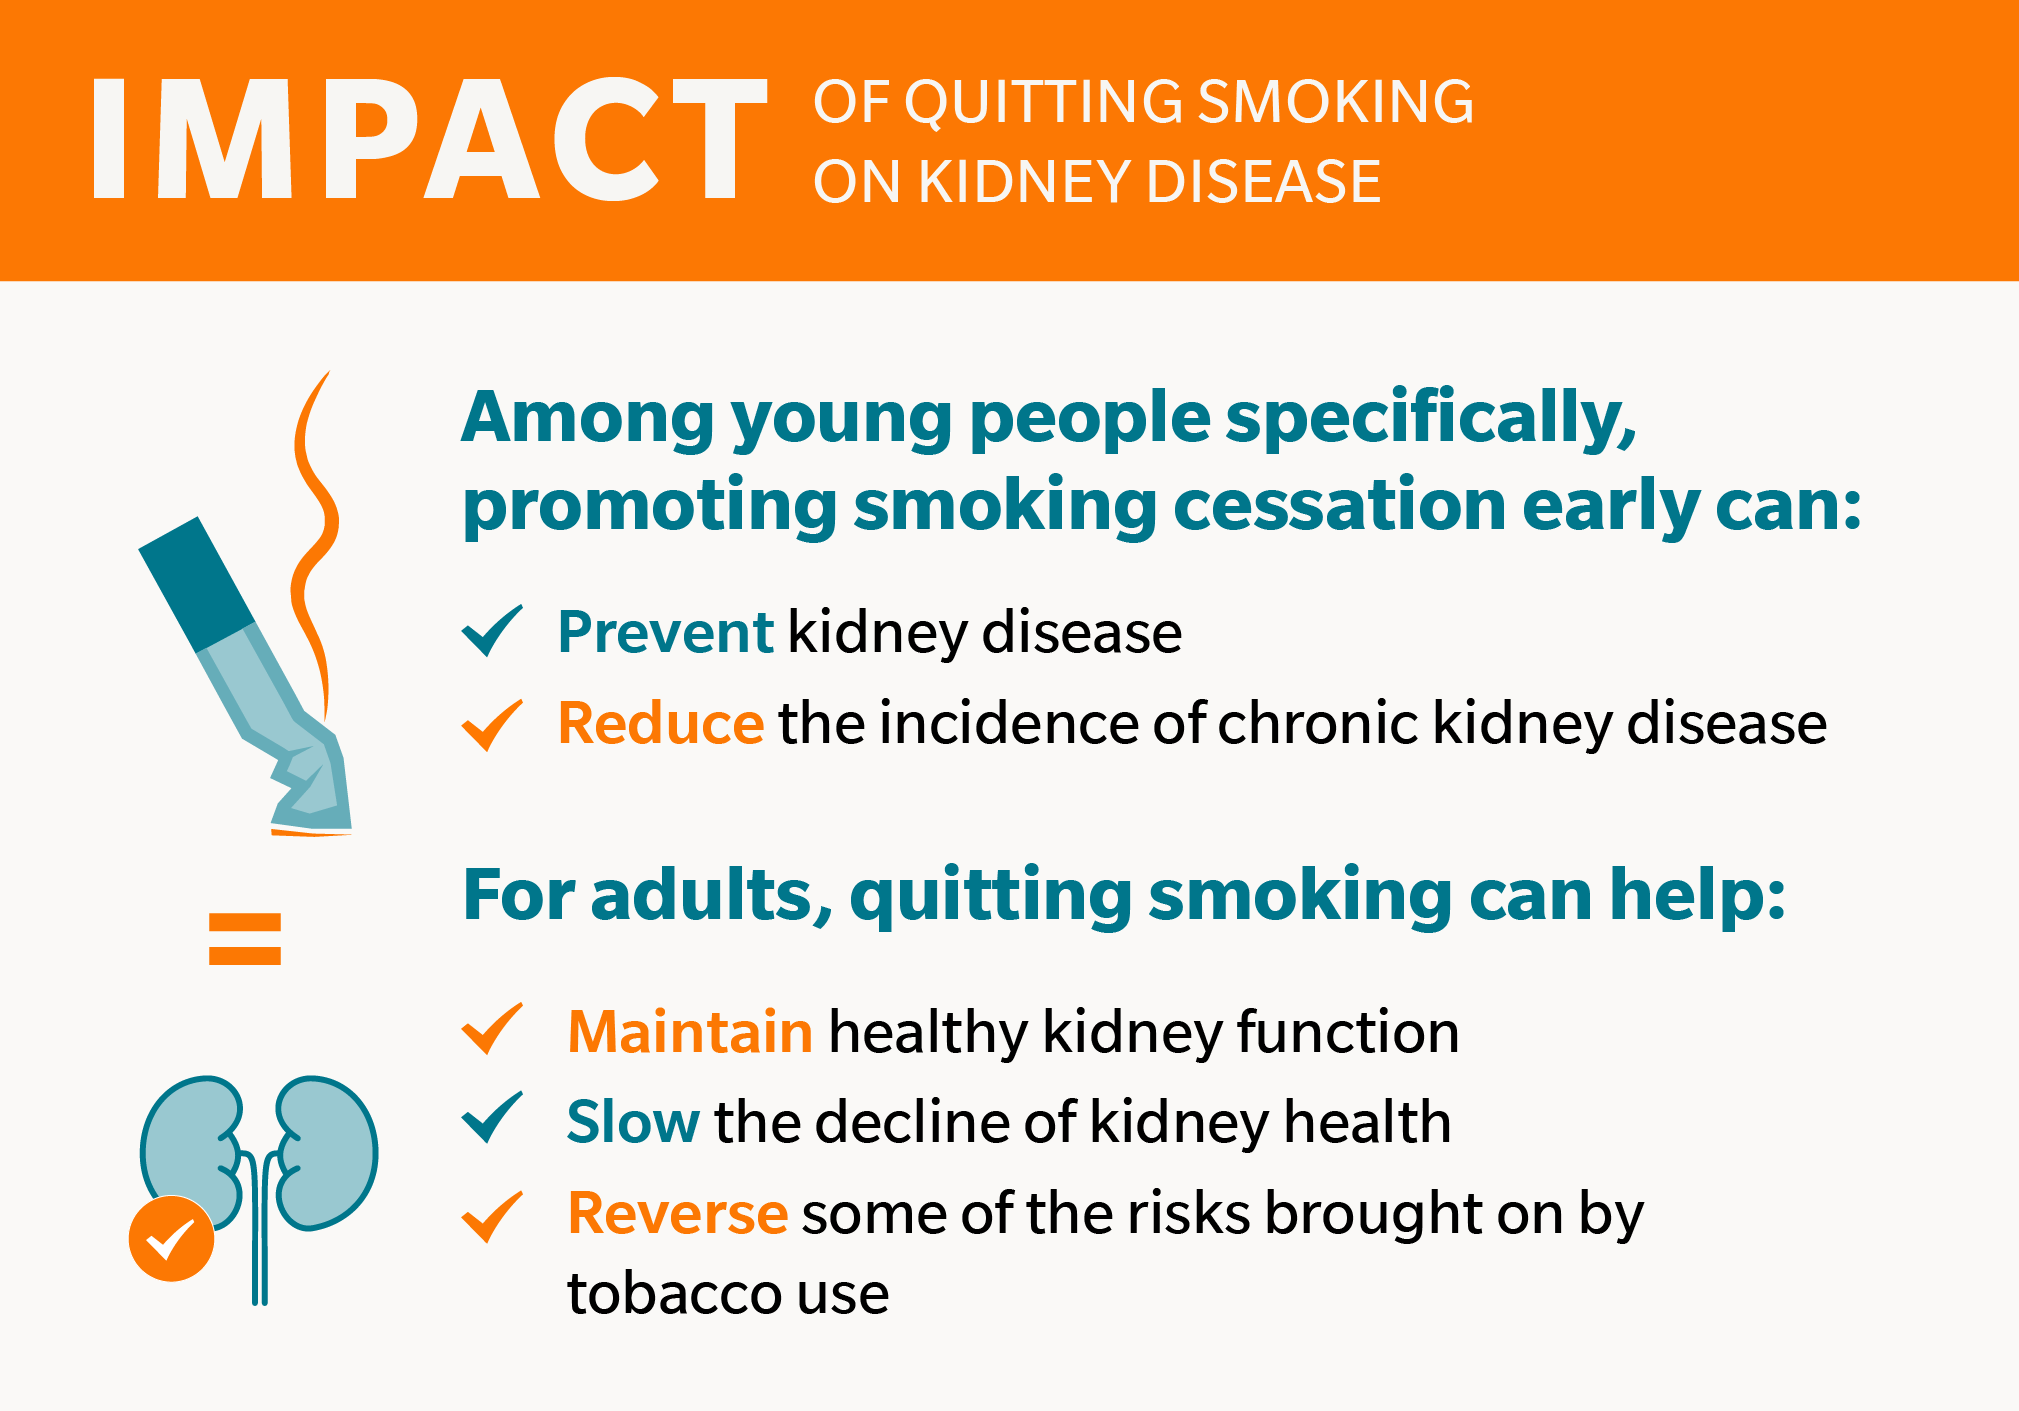 Among young people specifically, promoting smoking cessation early can prevent kidney disease and reduce the incidence of chronic kidney disease. For adults, quitting smoking can help maintain healthy kidney function, slow the decline of kidney health, and even reverse some of the risks brought on by tobacco use.